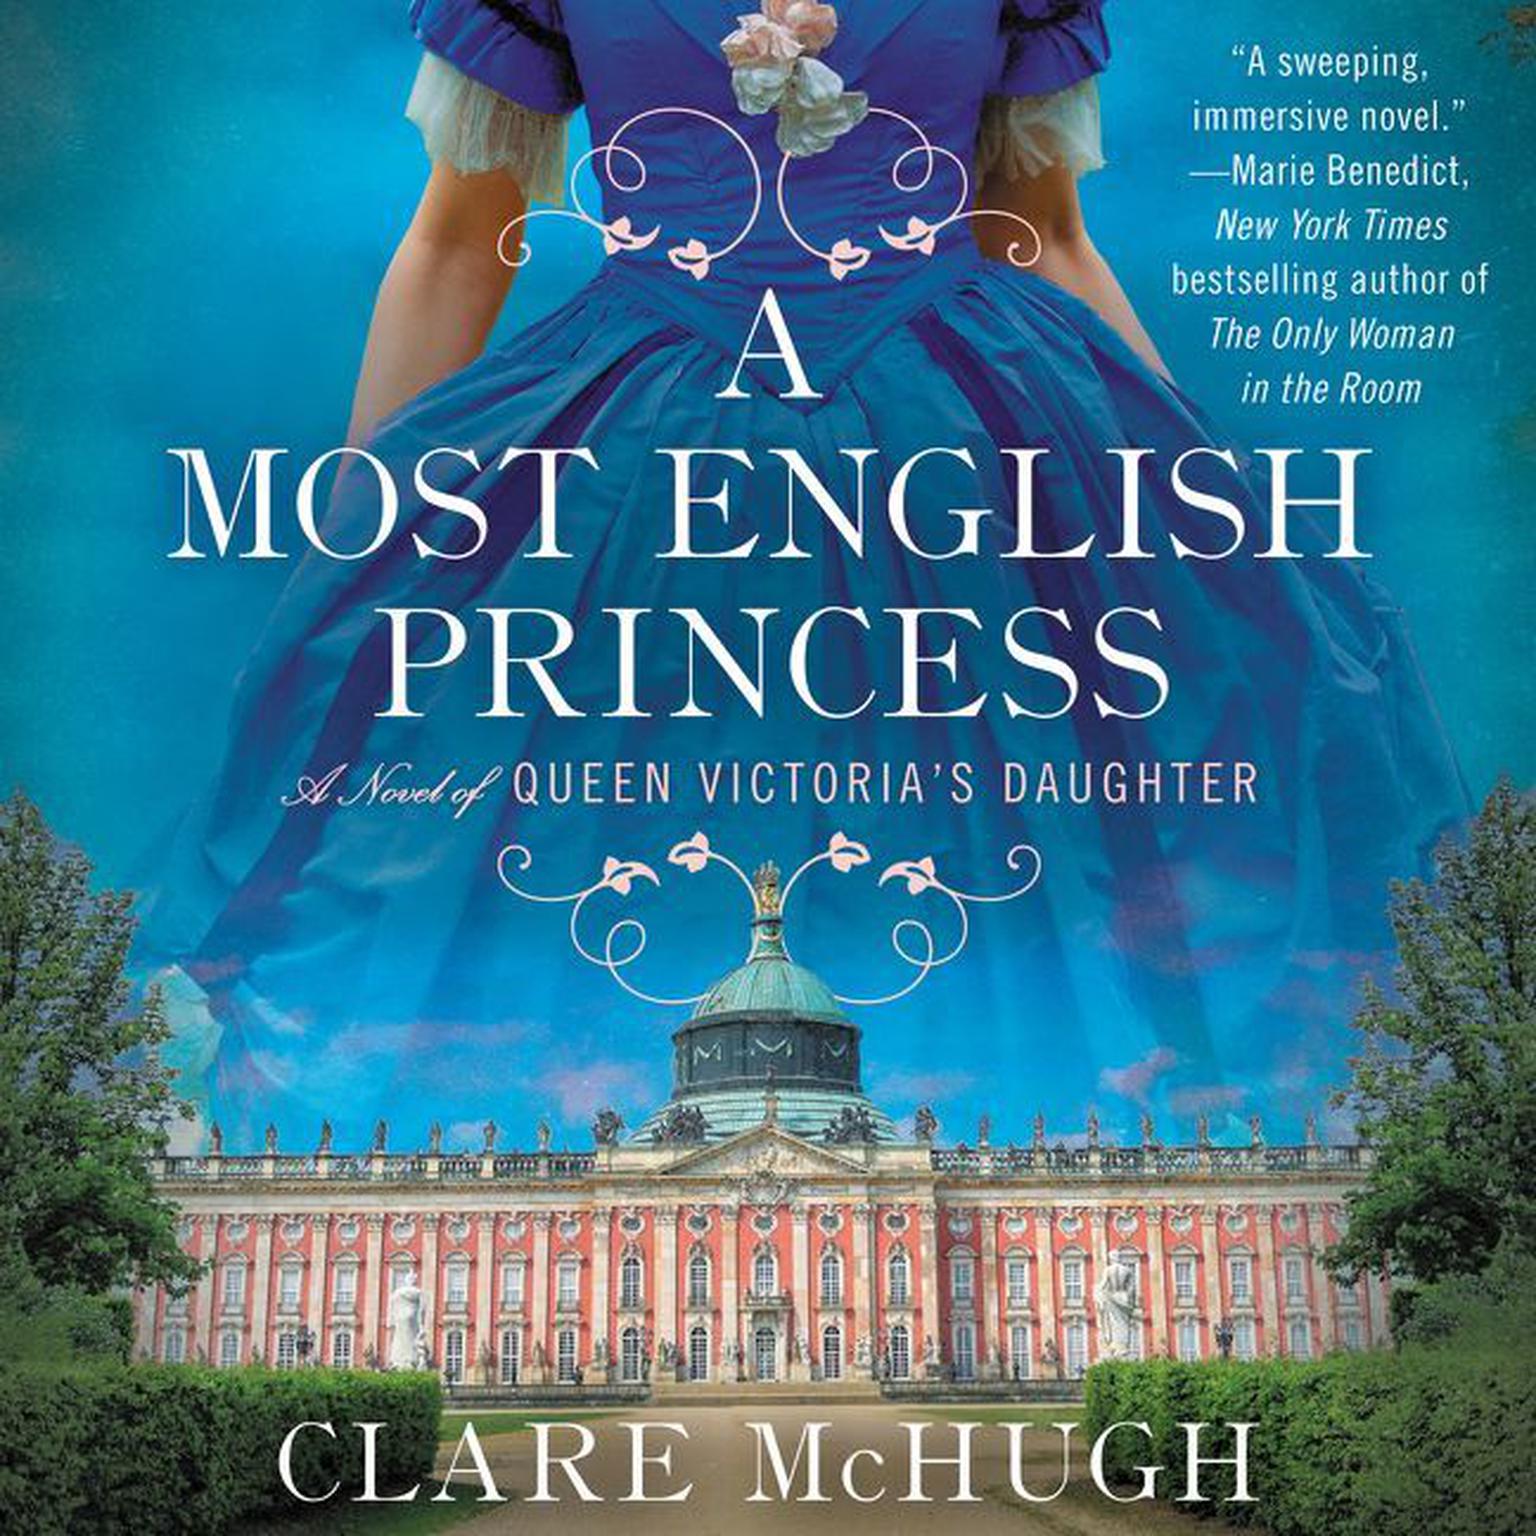 A Most English Princess: A Novel of Queen Victorias Daughter Audiobook, by Clare McHugh